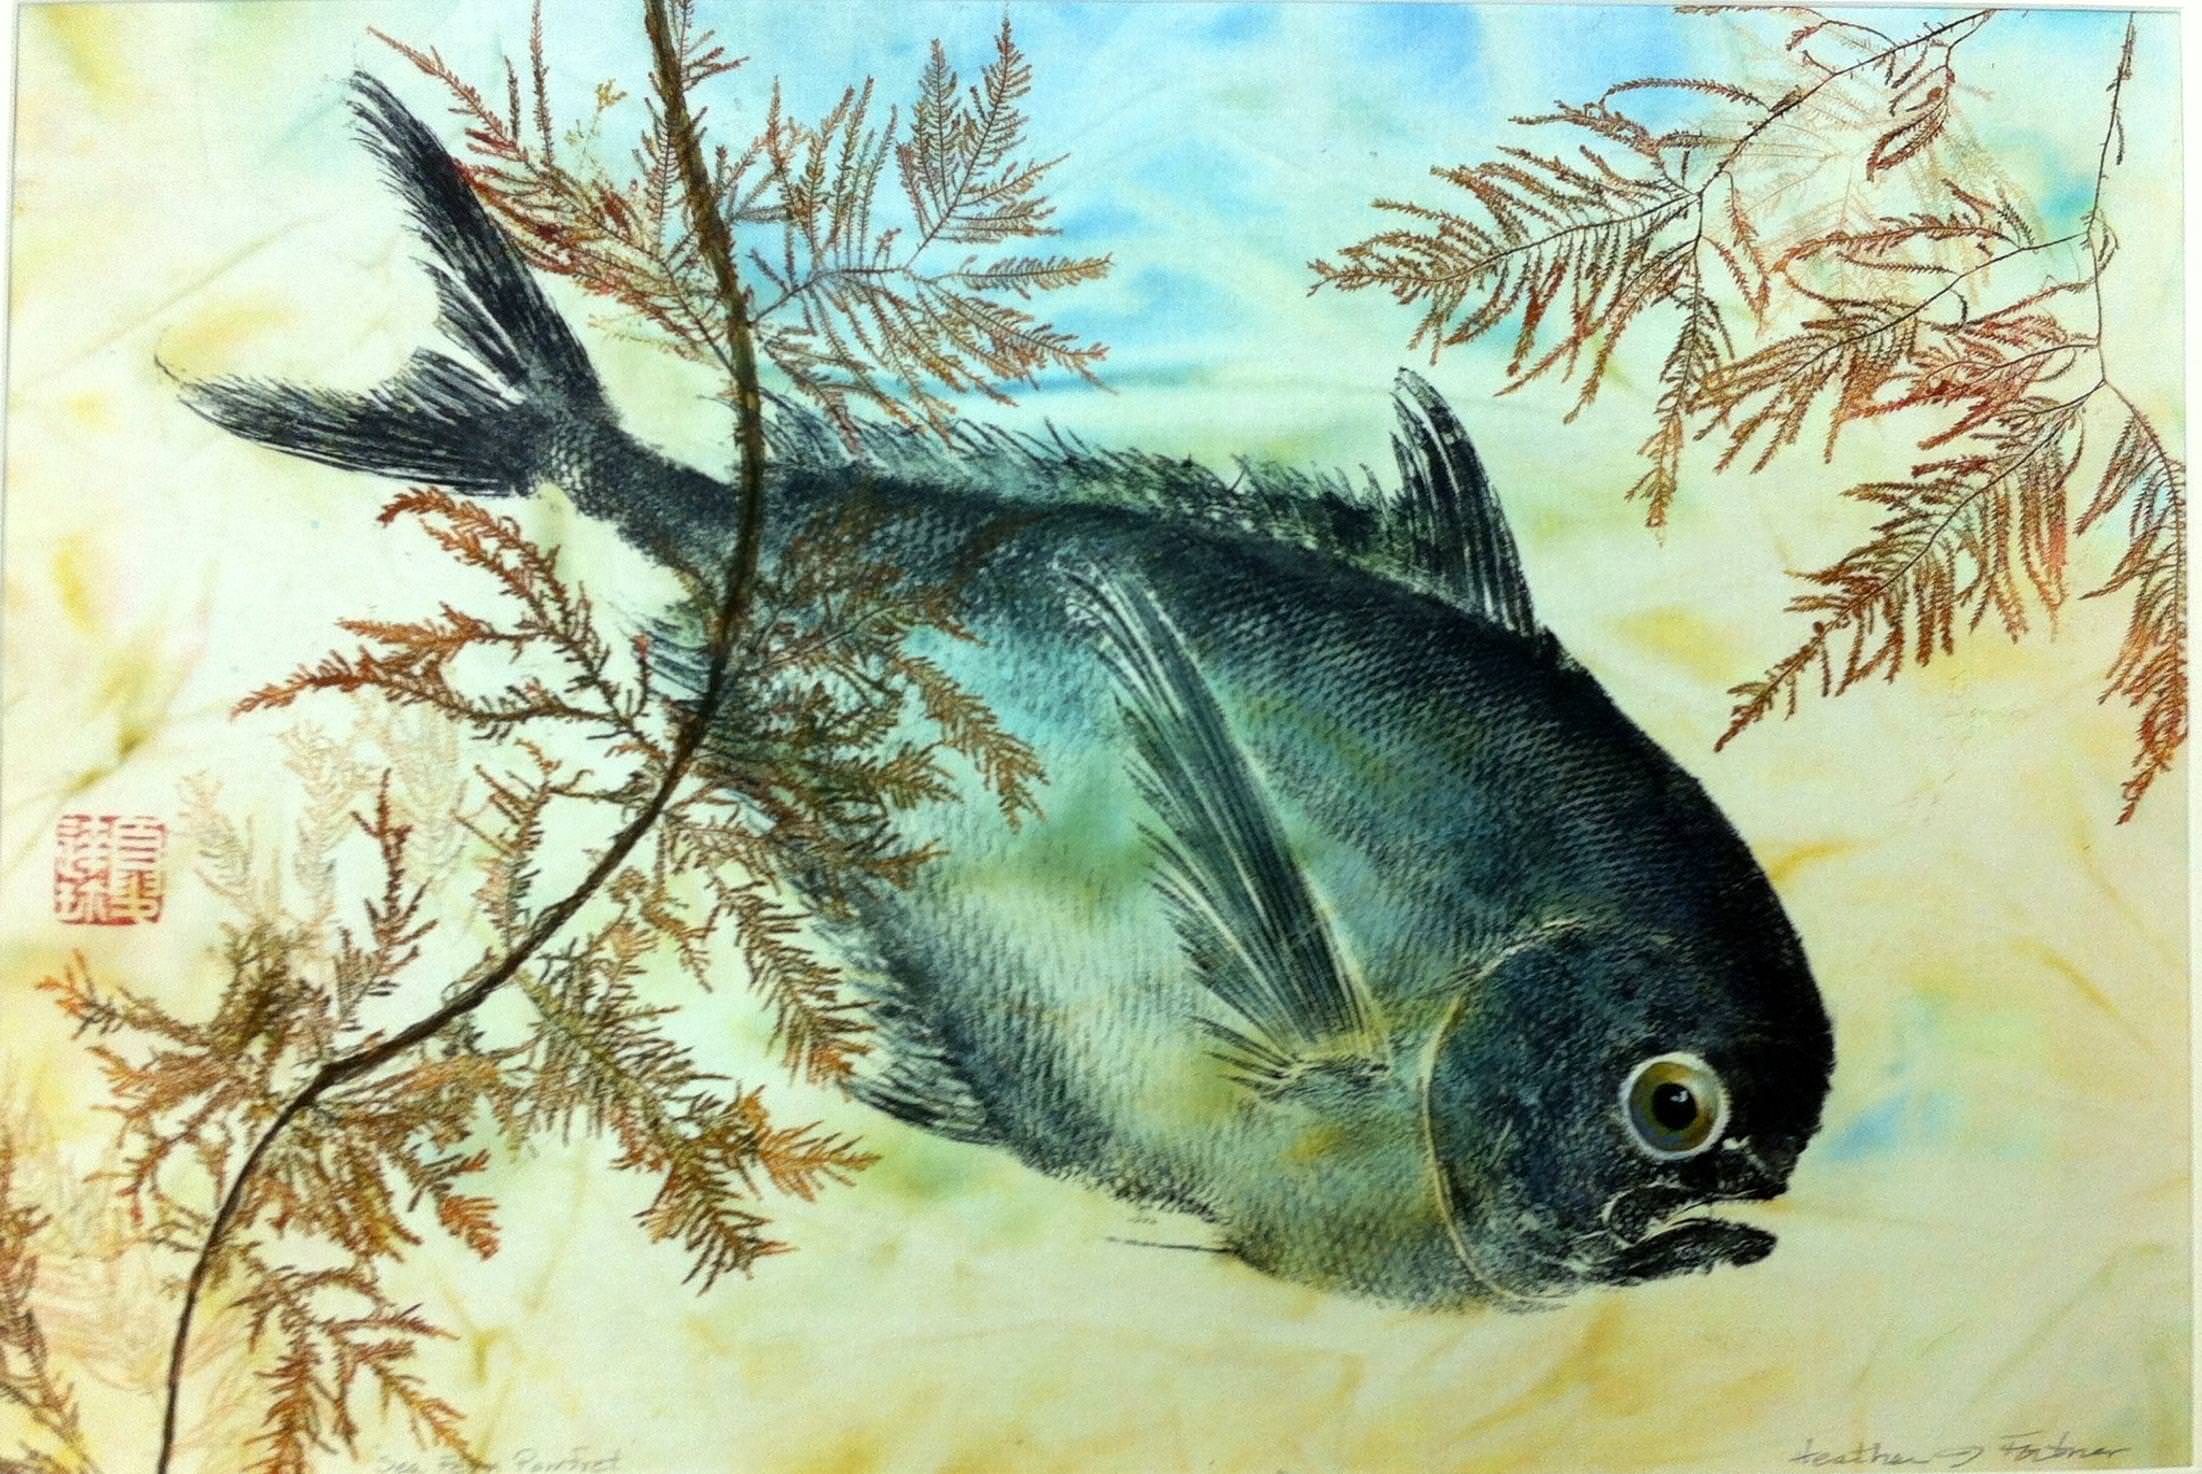 You Will Not Believe This Artist Paints with Dead Fish – Here’s How